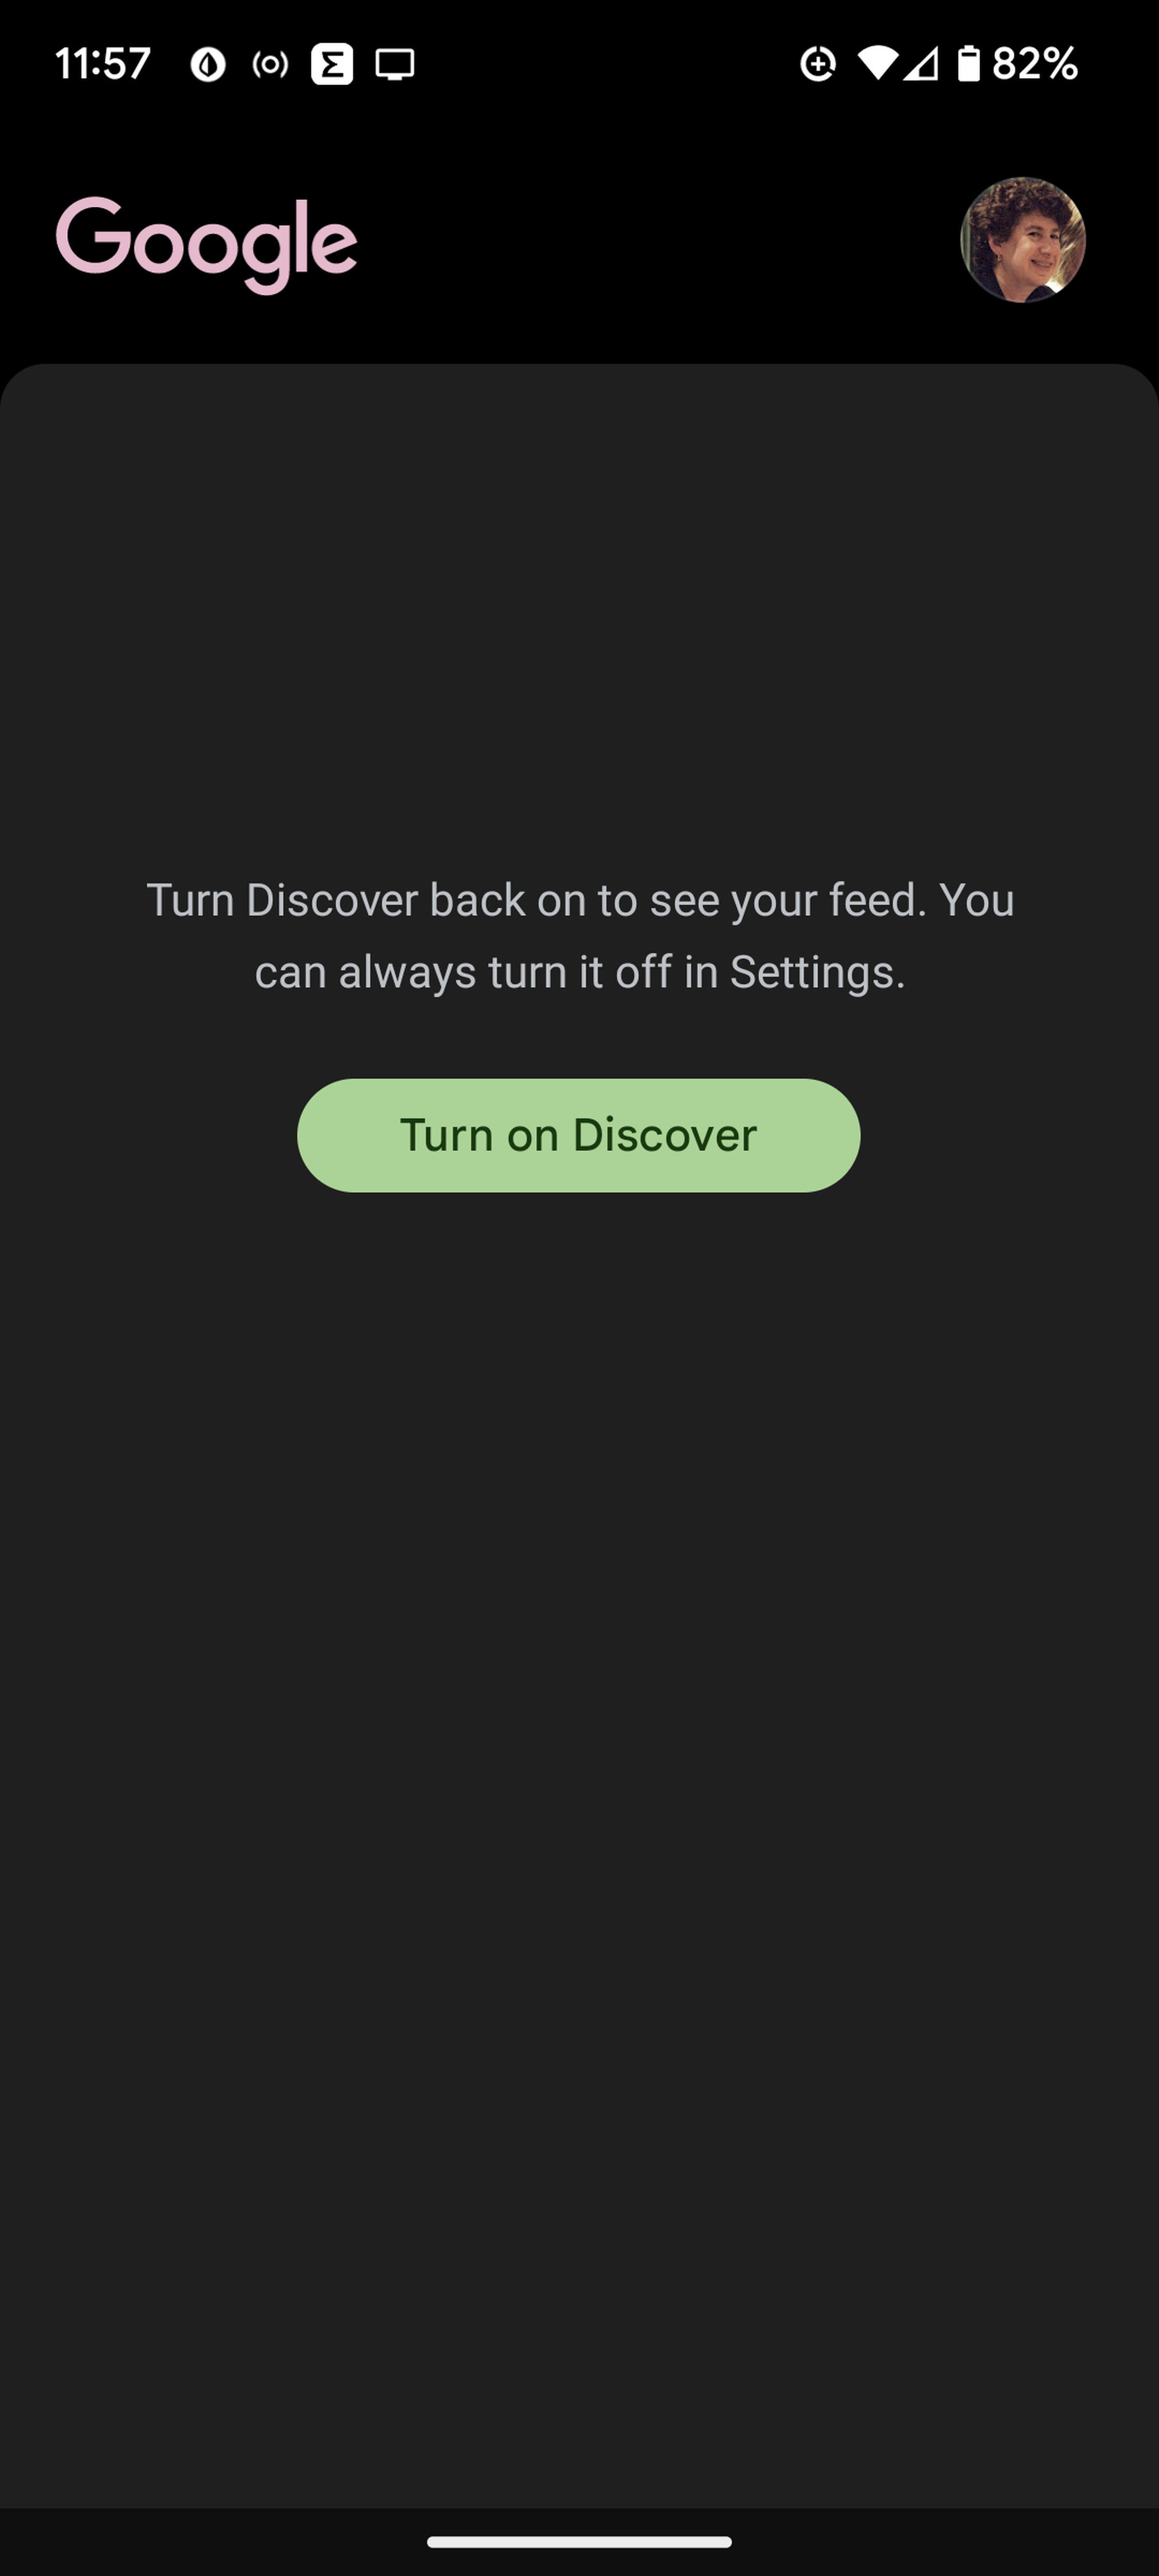 A blank page with Google on top left, a personal icon on top right, and a green button with Turn on Discover in the center.